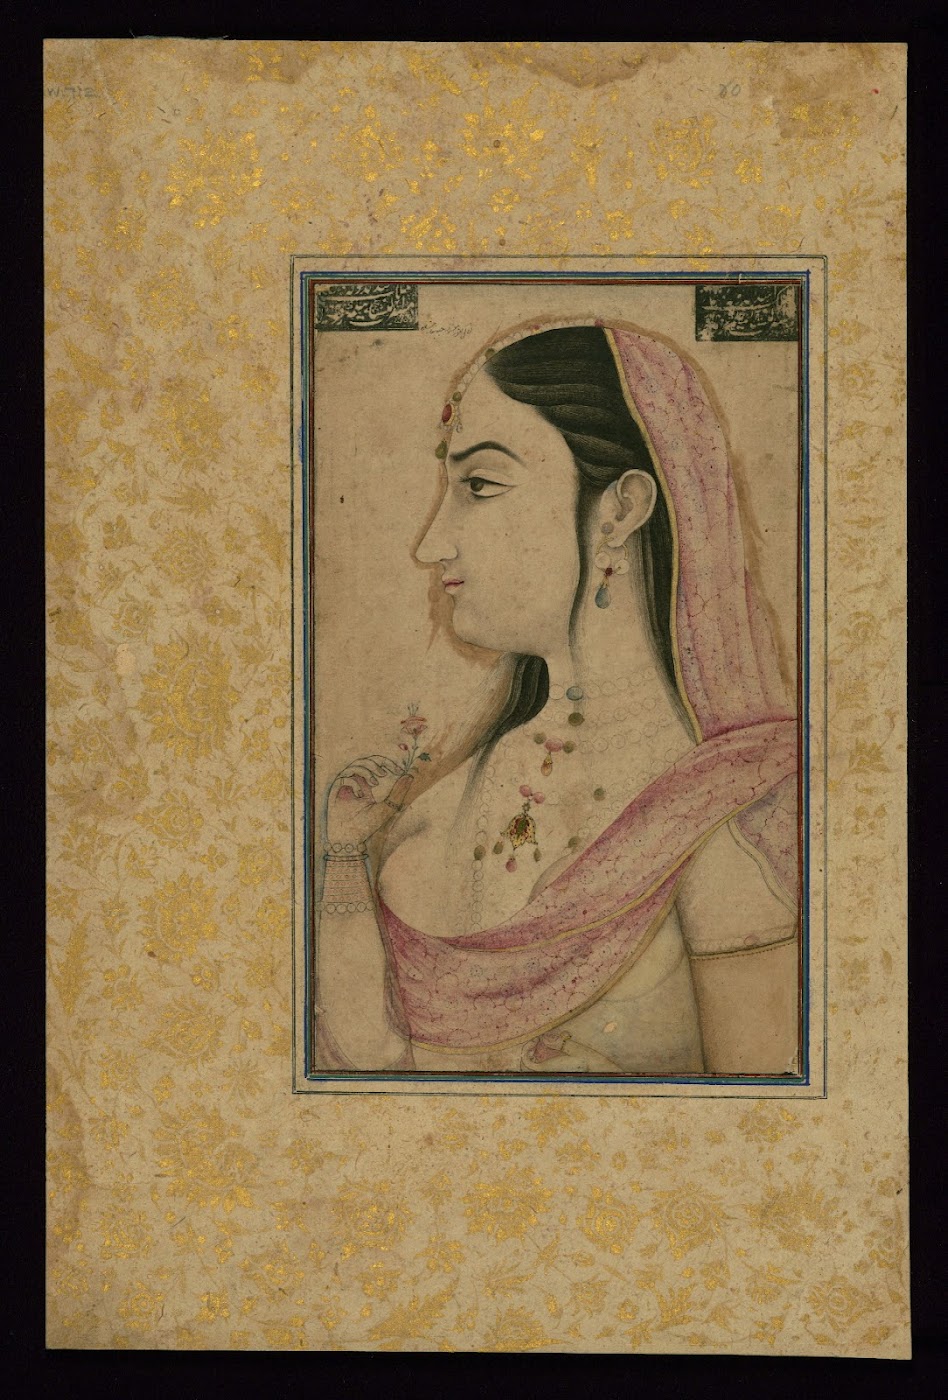 Portrait of Lal Kunwar, the beloved of the eighth Mughal Emperor Jahandār Shāh -  Mughal Painting Circa 18th century